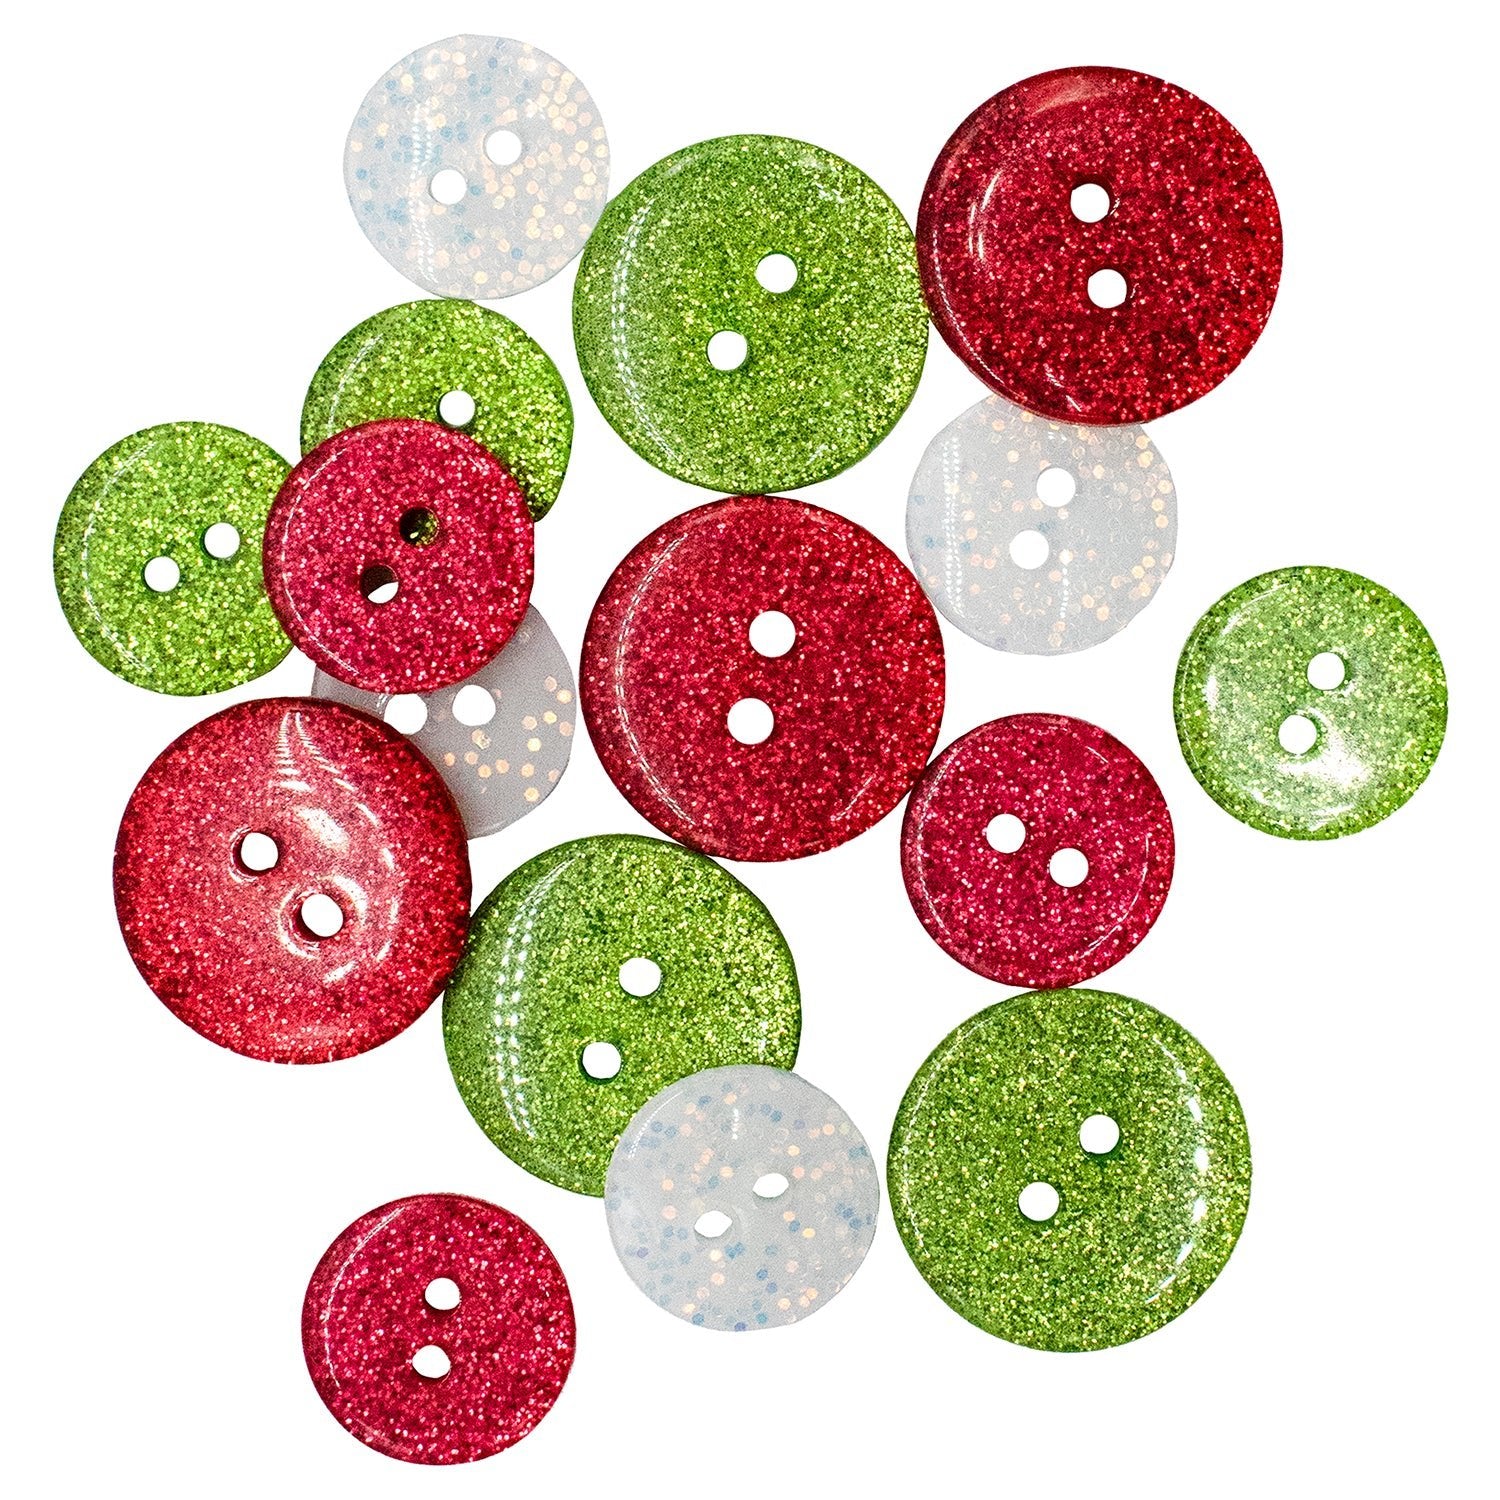 BG CHRISTMAS Tiny Round Craft Buttons Sewing Quilting Red Green